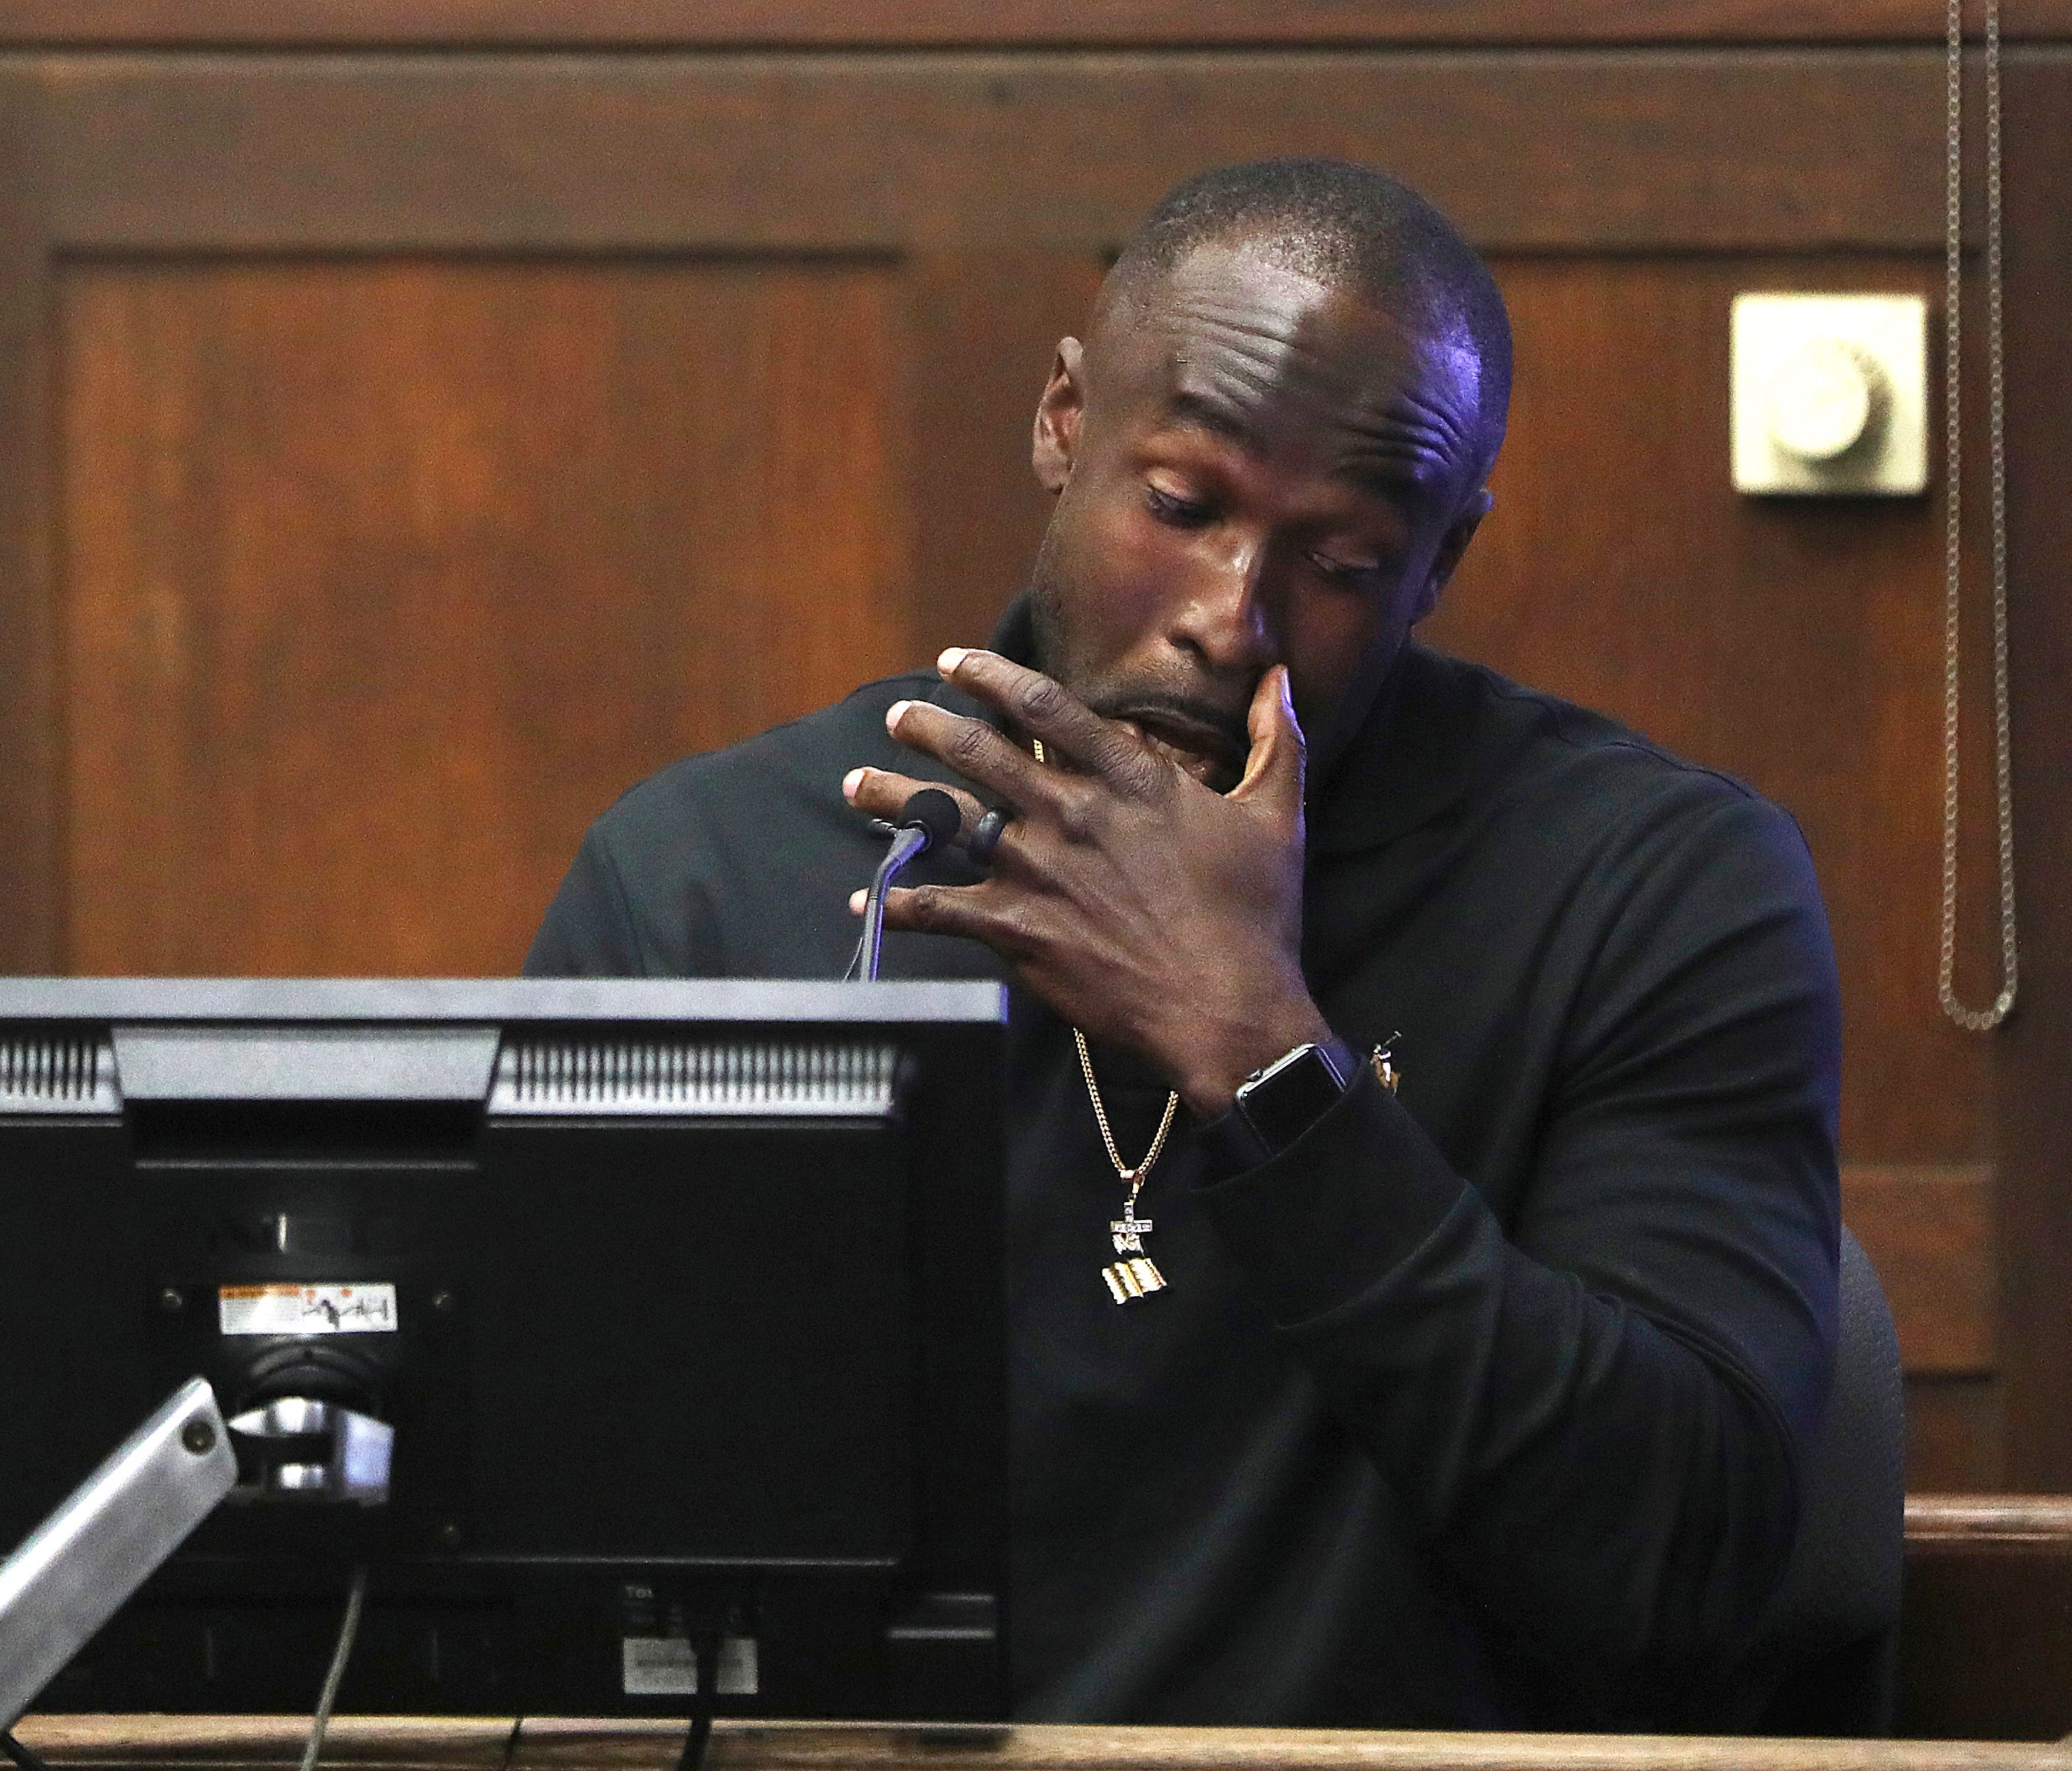 National Football League player Deonte Thompson is questioned by A.D.A. Mark Lee Monday, March 27, 2017, during the trial of former New England Patriots tight end Aaron Hernandez in Suffolk Superior Court in Boston.